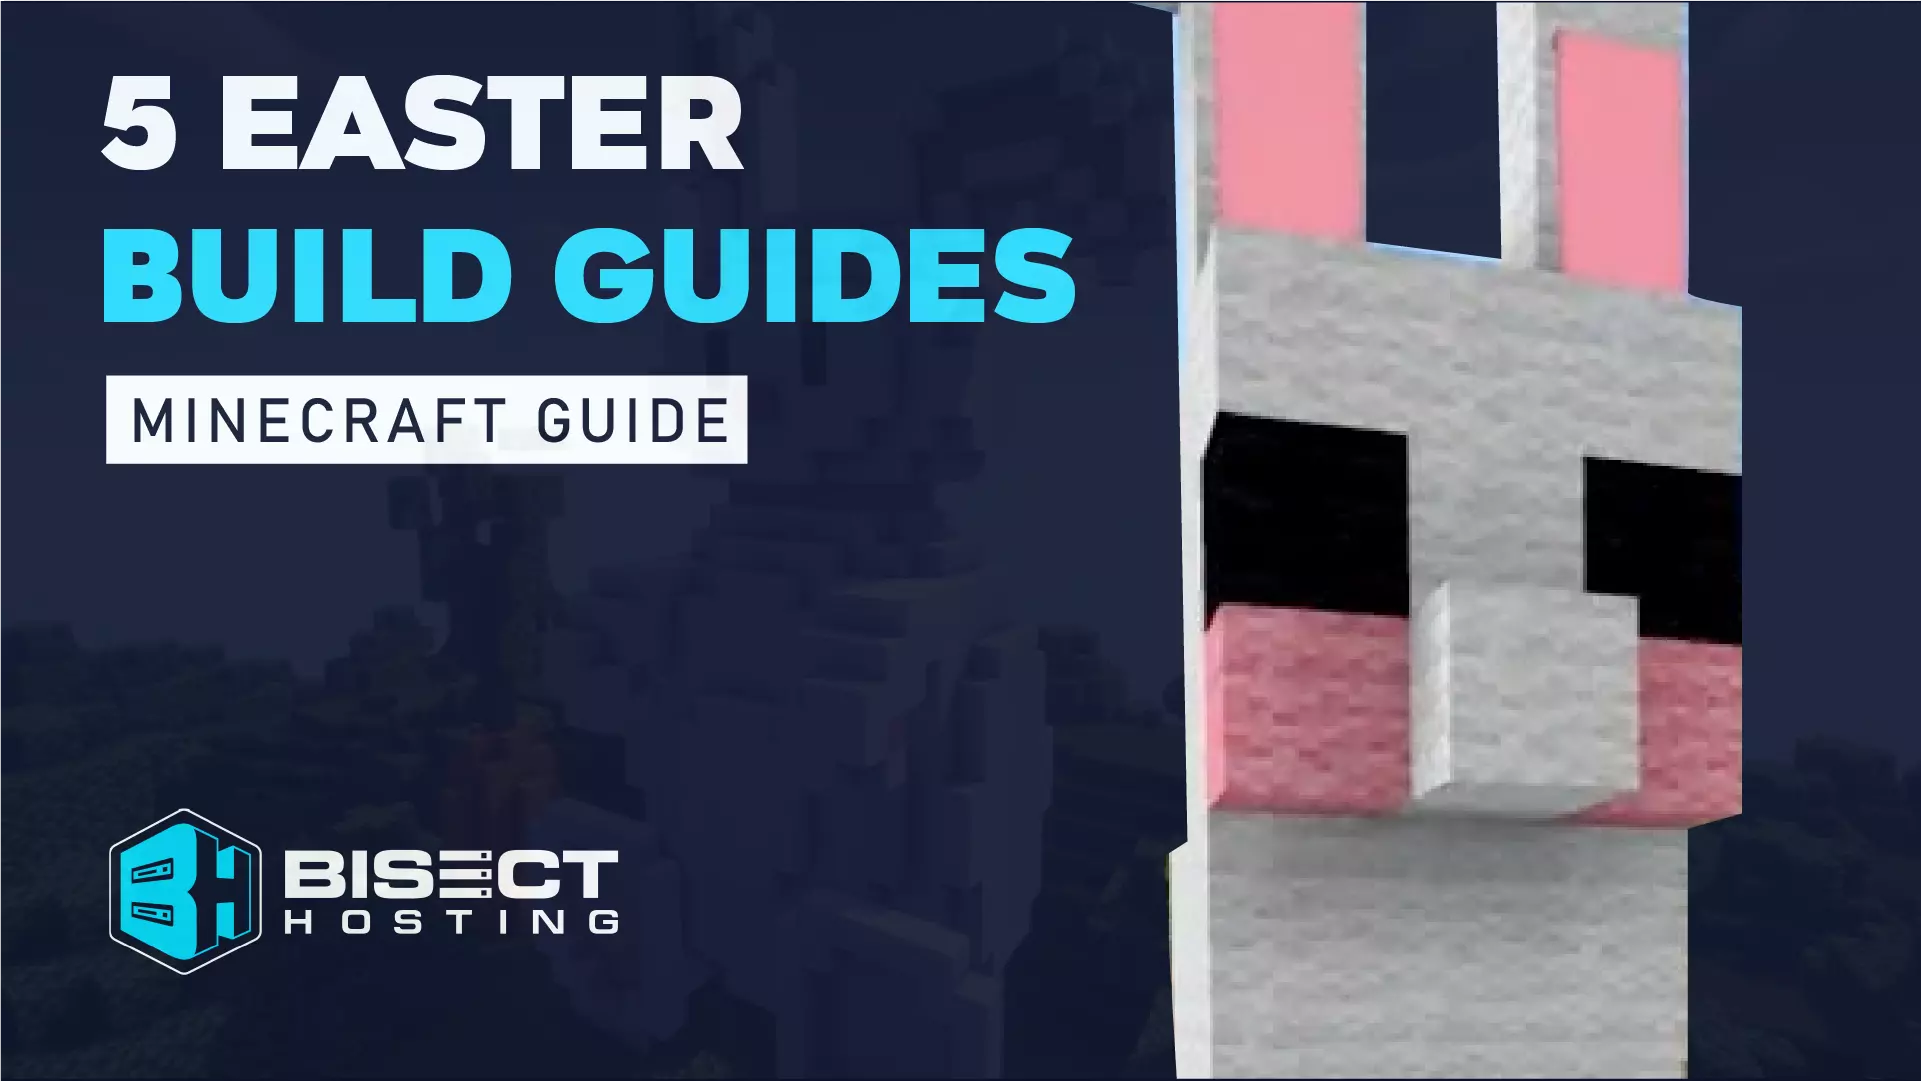 5 Easter Build Guides for Minecraft